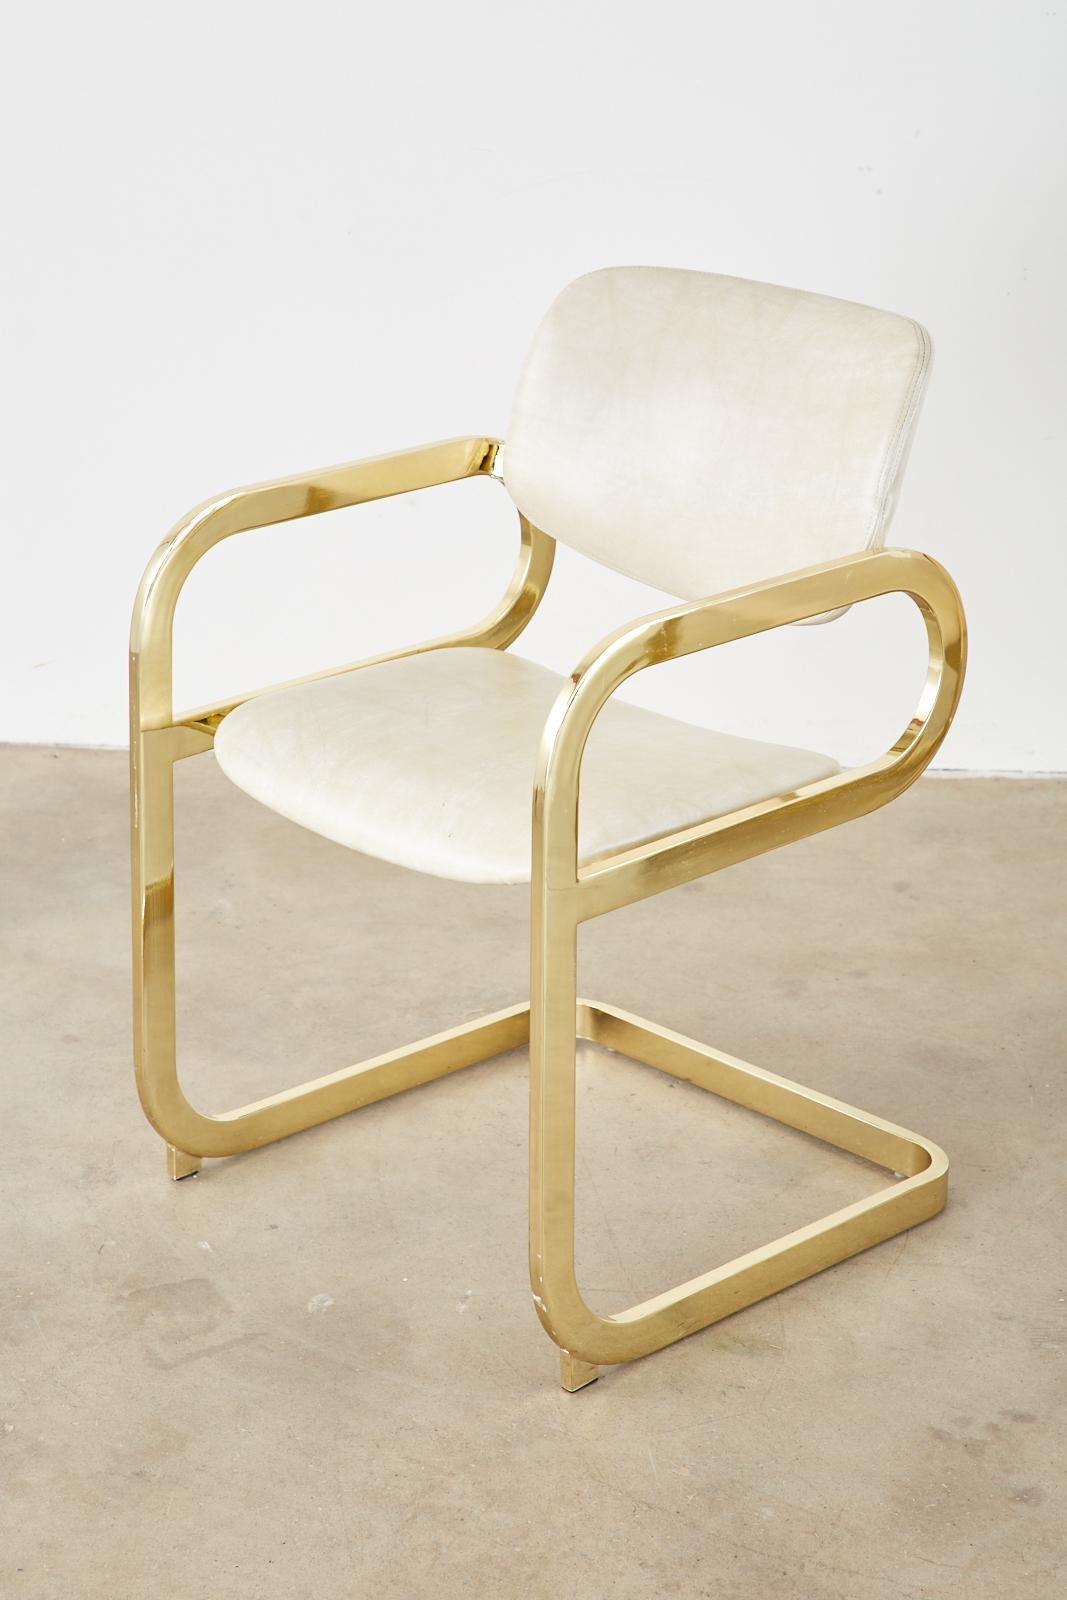 Chic, mid-century modern associated pair of Hollywood Regency gold cantilever dining chairs or lounge chairs by DIA (the Design Institute of America). Each armchair beautifully plated gold constructed with a flat bar design. Each upholstered with a